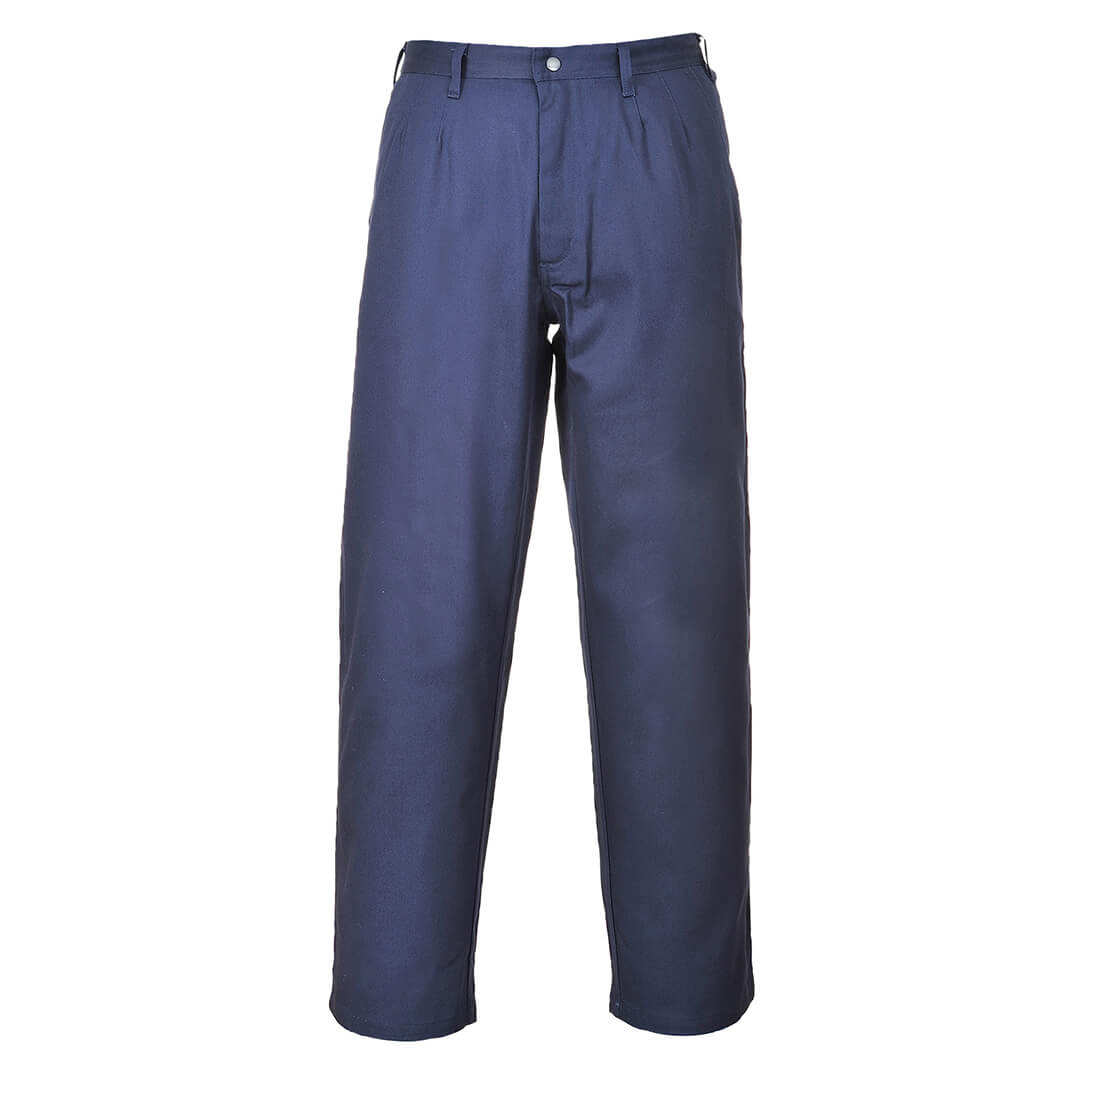 Image of Biz Flame Pro Mens Flame Resistant Trousers Navy Blue L 32"